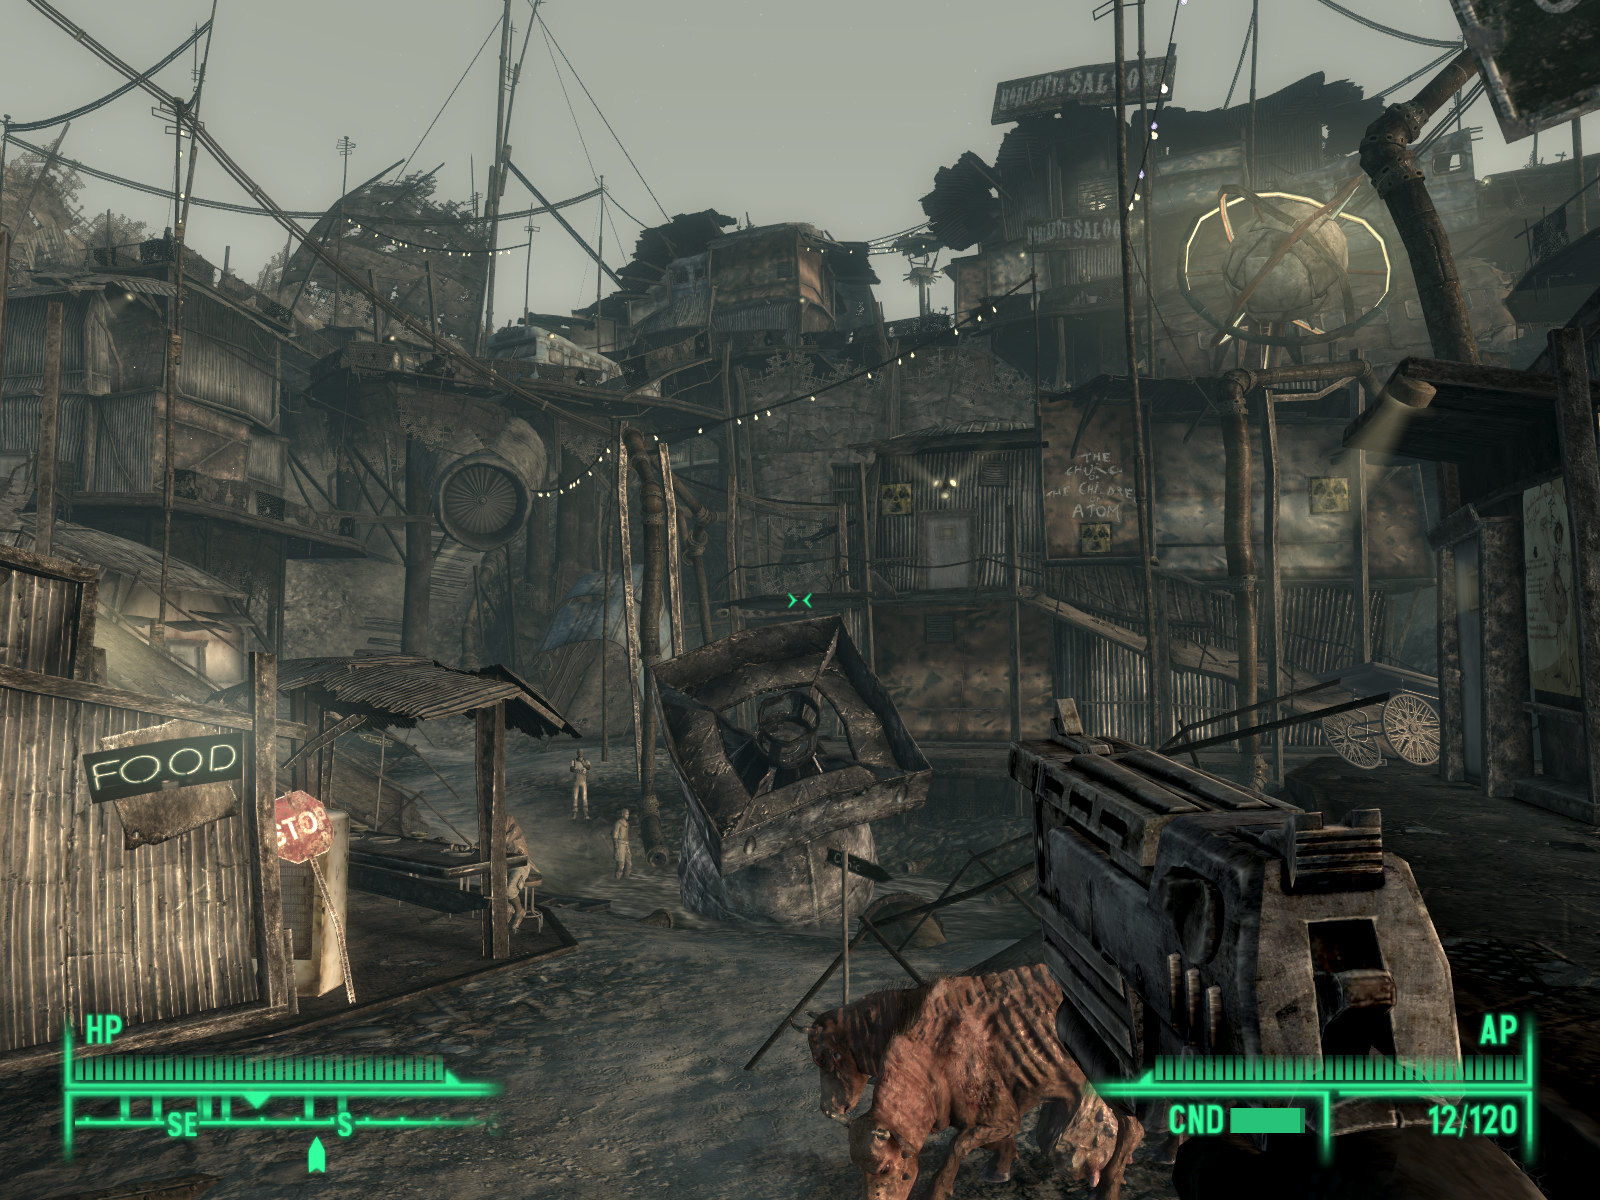 Fallout какой год в игре. Игра Fallout 3. Fallout 3 GOTY. Фоллаут 3 скрины. Фоллаут 3 на пс3.